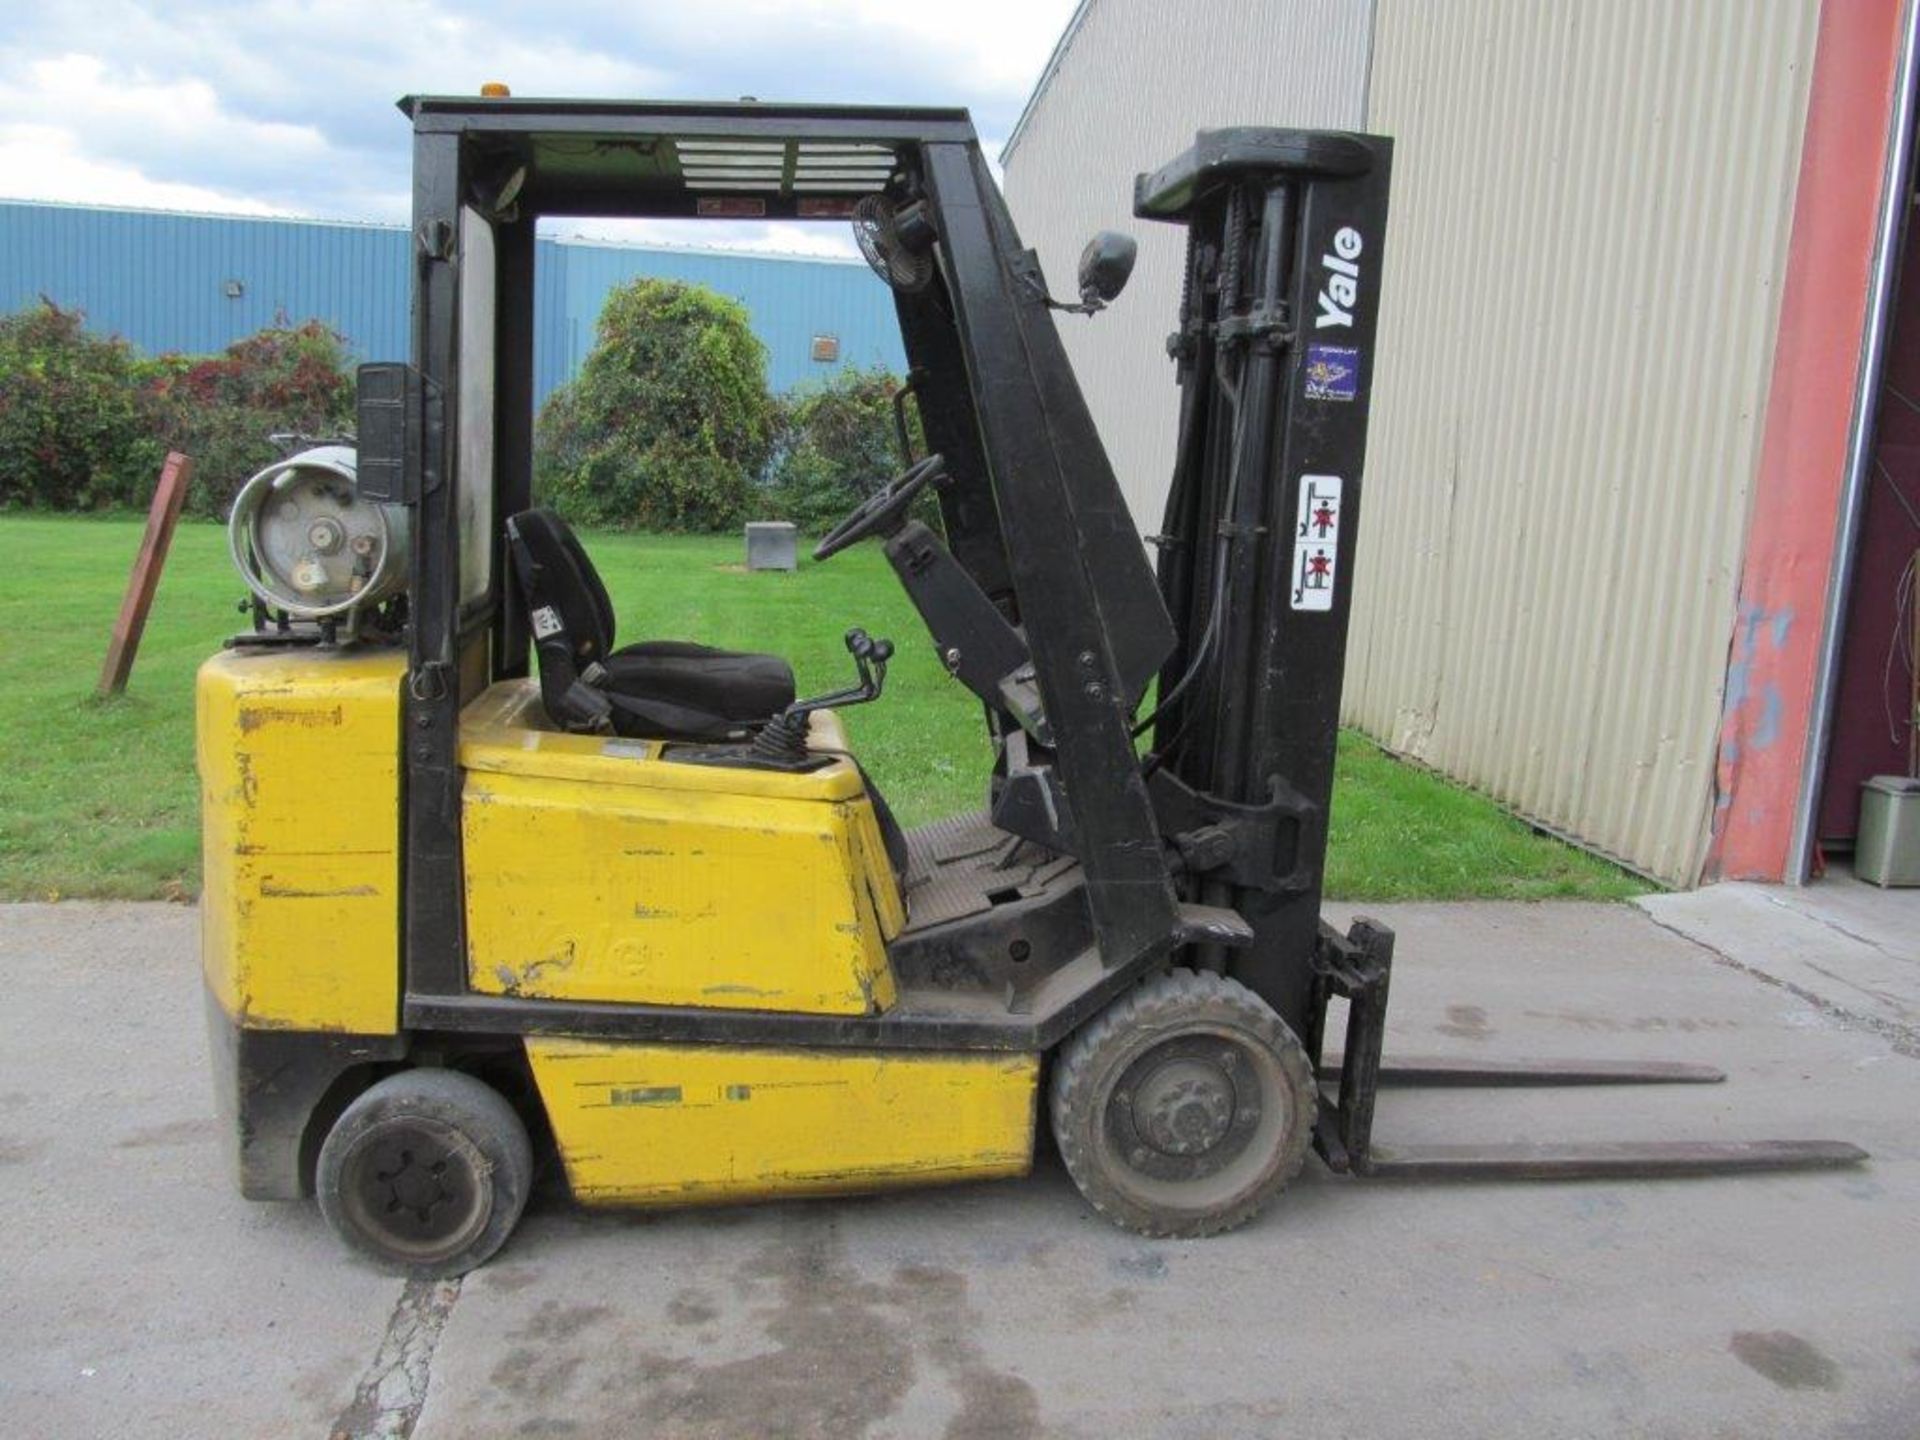 YALE PROPANE FORKLIFT MODEL: E466087, 5000 LBS CAP, INDOOR/OUTDOOR, "PROPANE TANK NOT INCLUDED" - Image 5 of 10